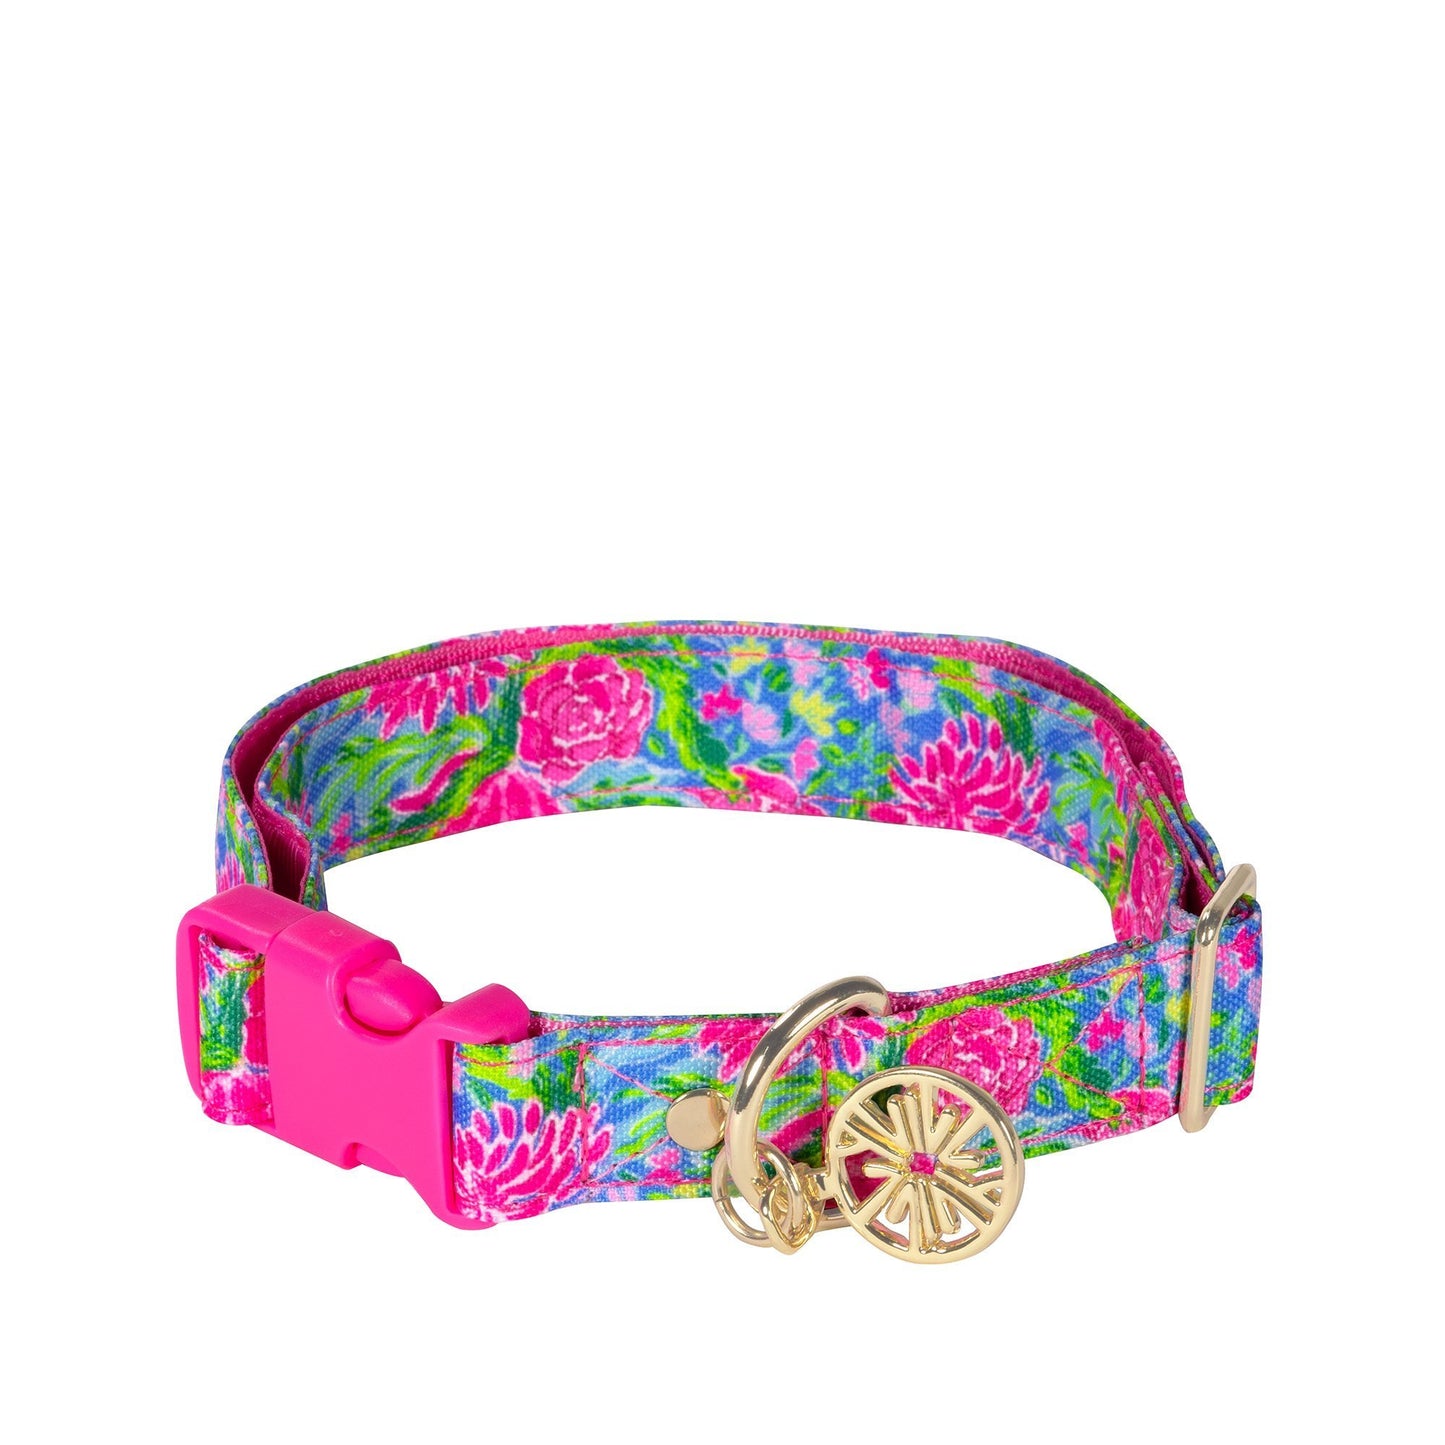 Lilly Pulitzer Dog Collar in Bunny Business Large